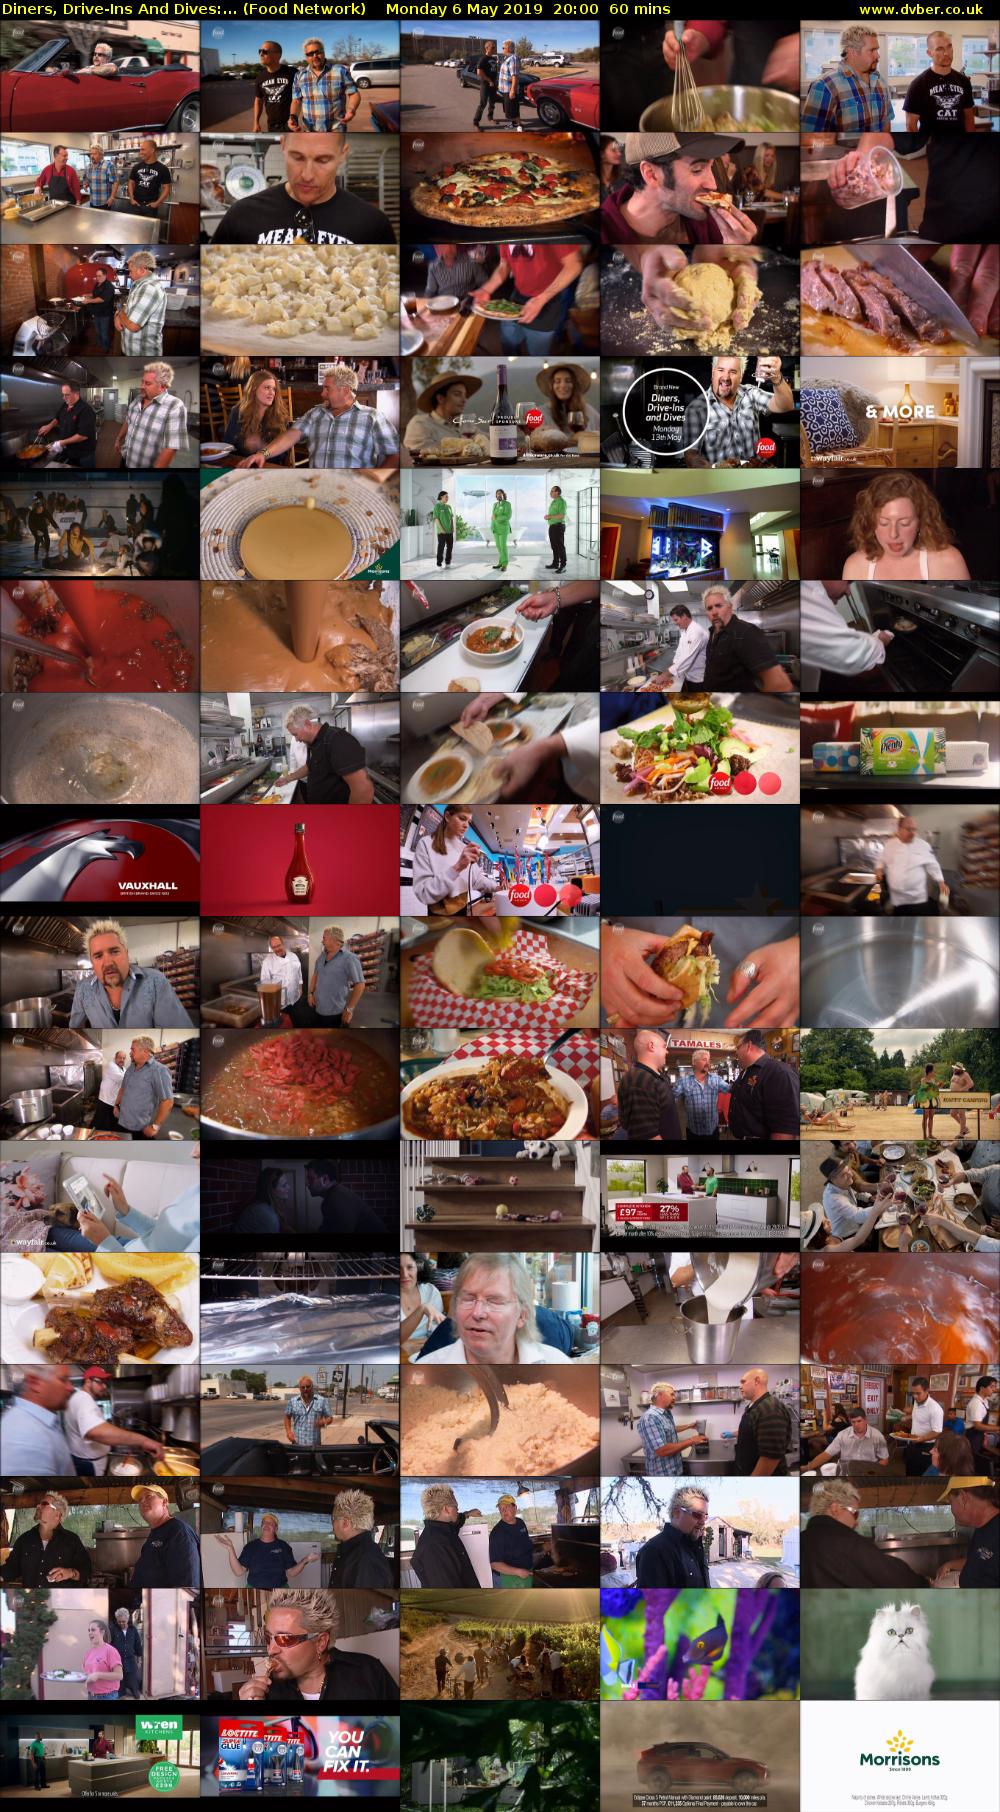 Diners, Drive-Ins And Dives:... (Food Network) Monday 6 May 2019 20:00 - 21:00